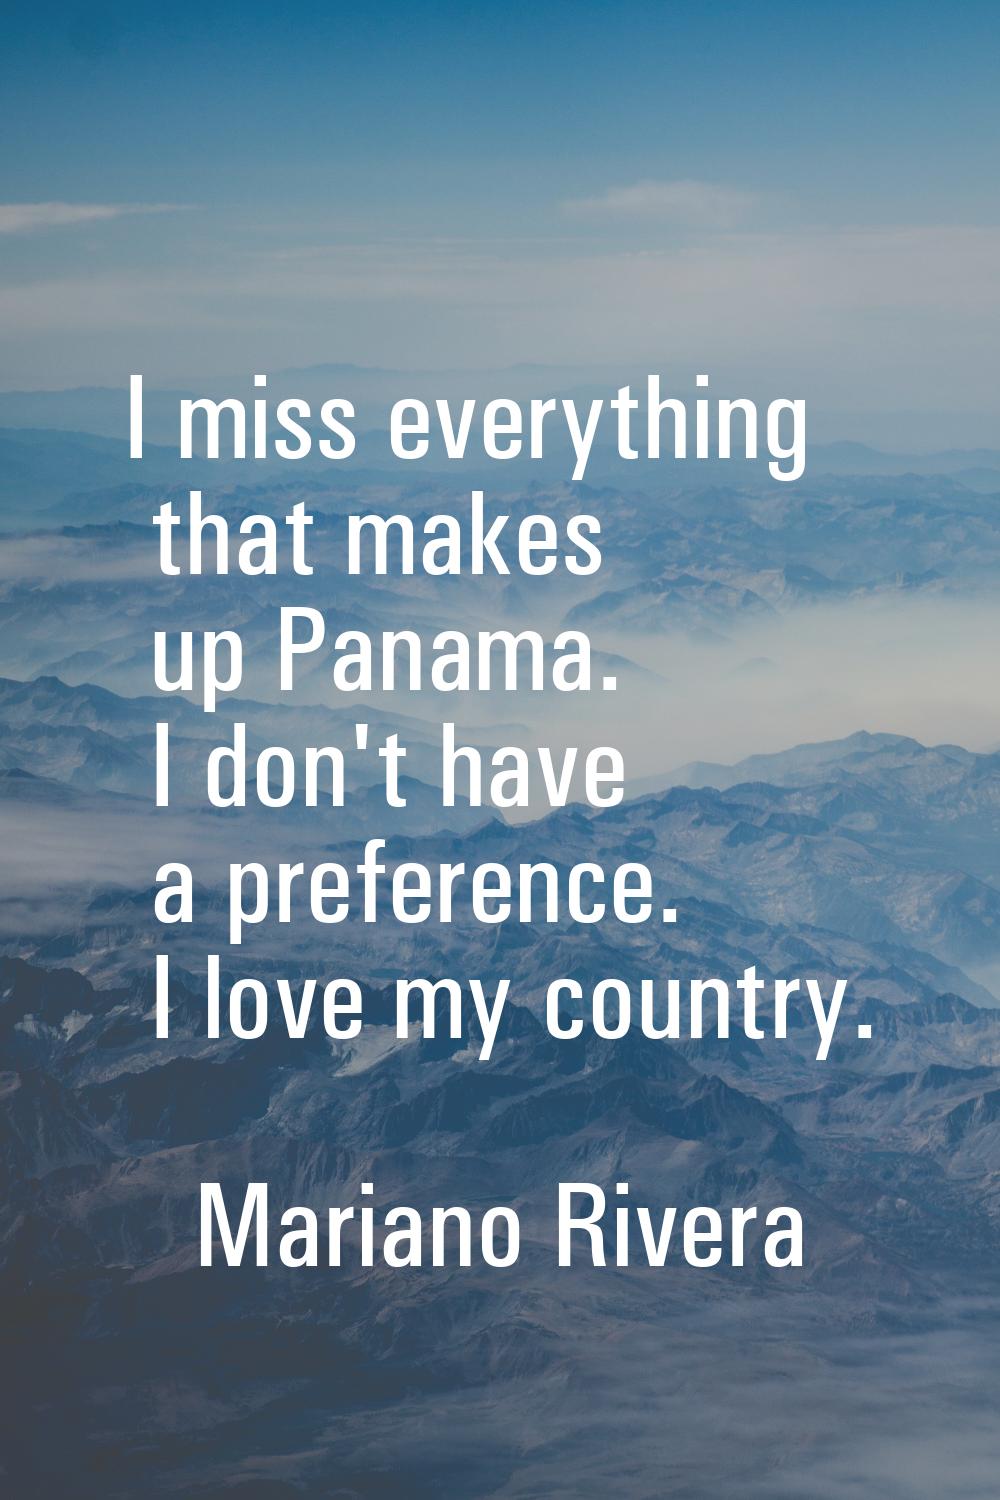 I miss everything that makes up Panama. I don't have a preference. I love my country.